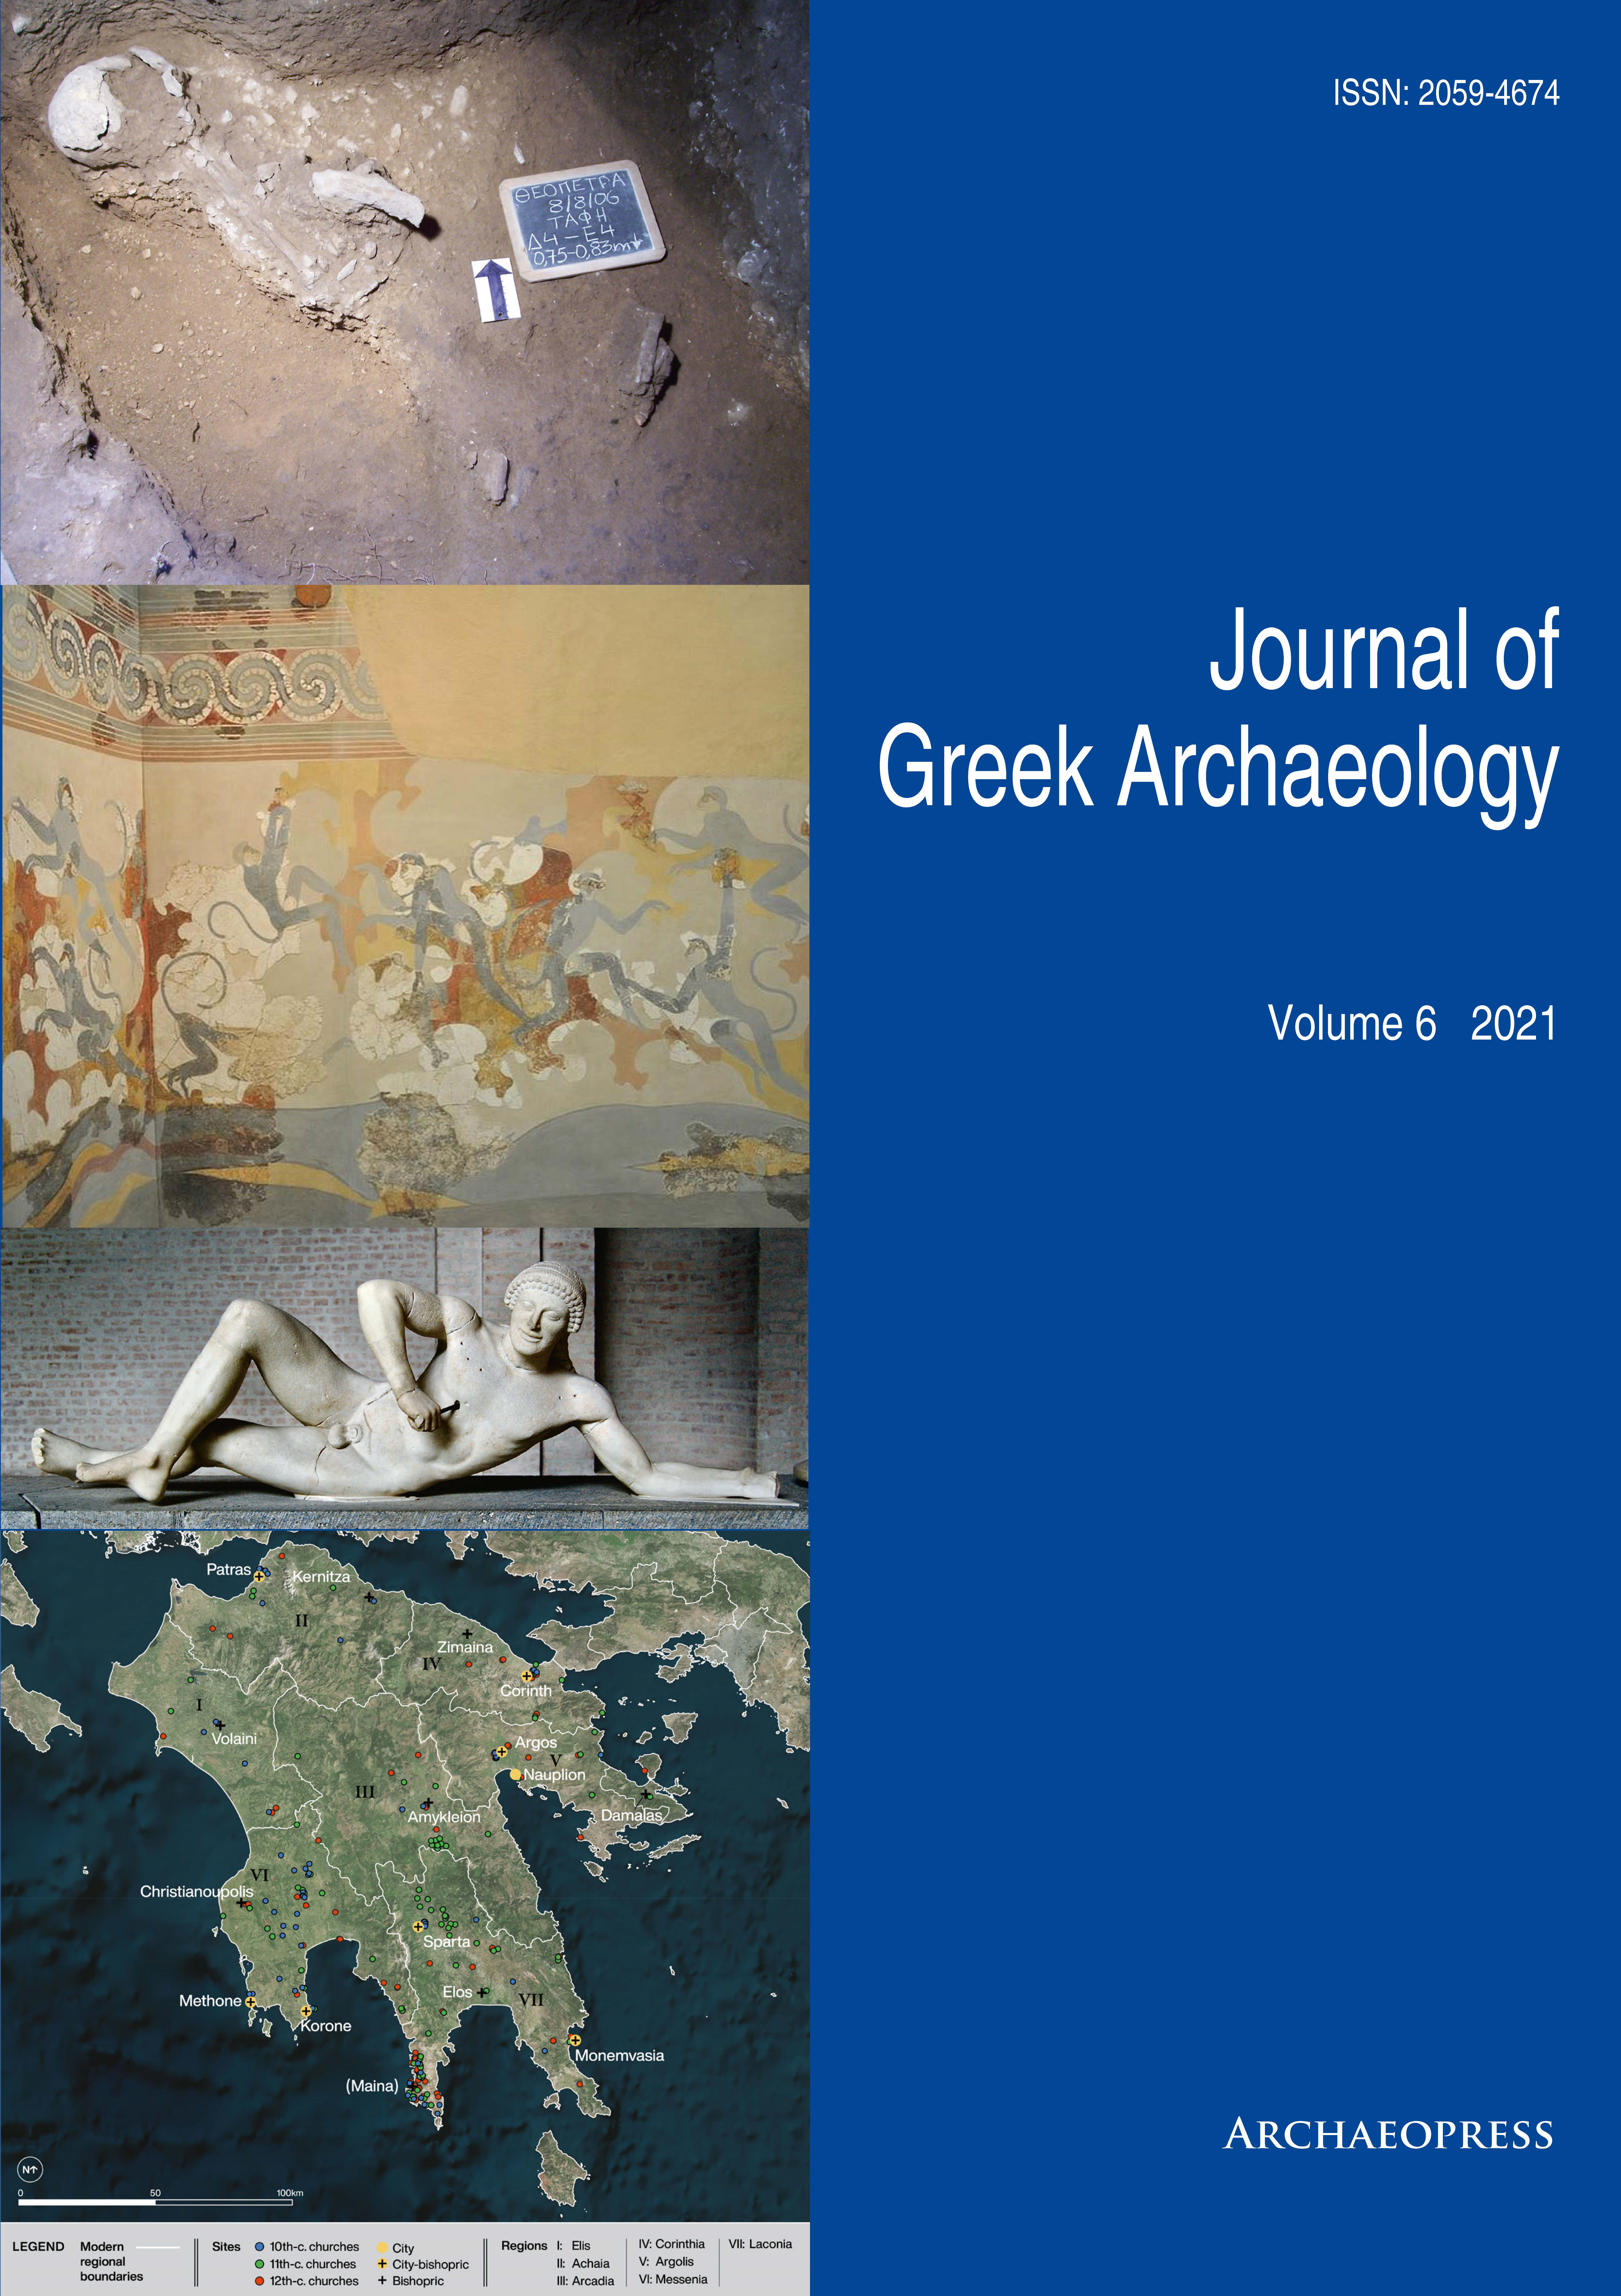 					View Vol. 6 (2021): Journal of Greek Archaeology 2021
				